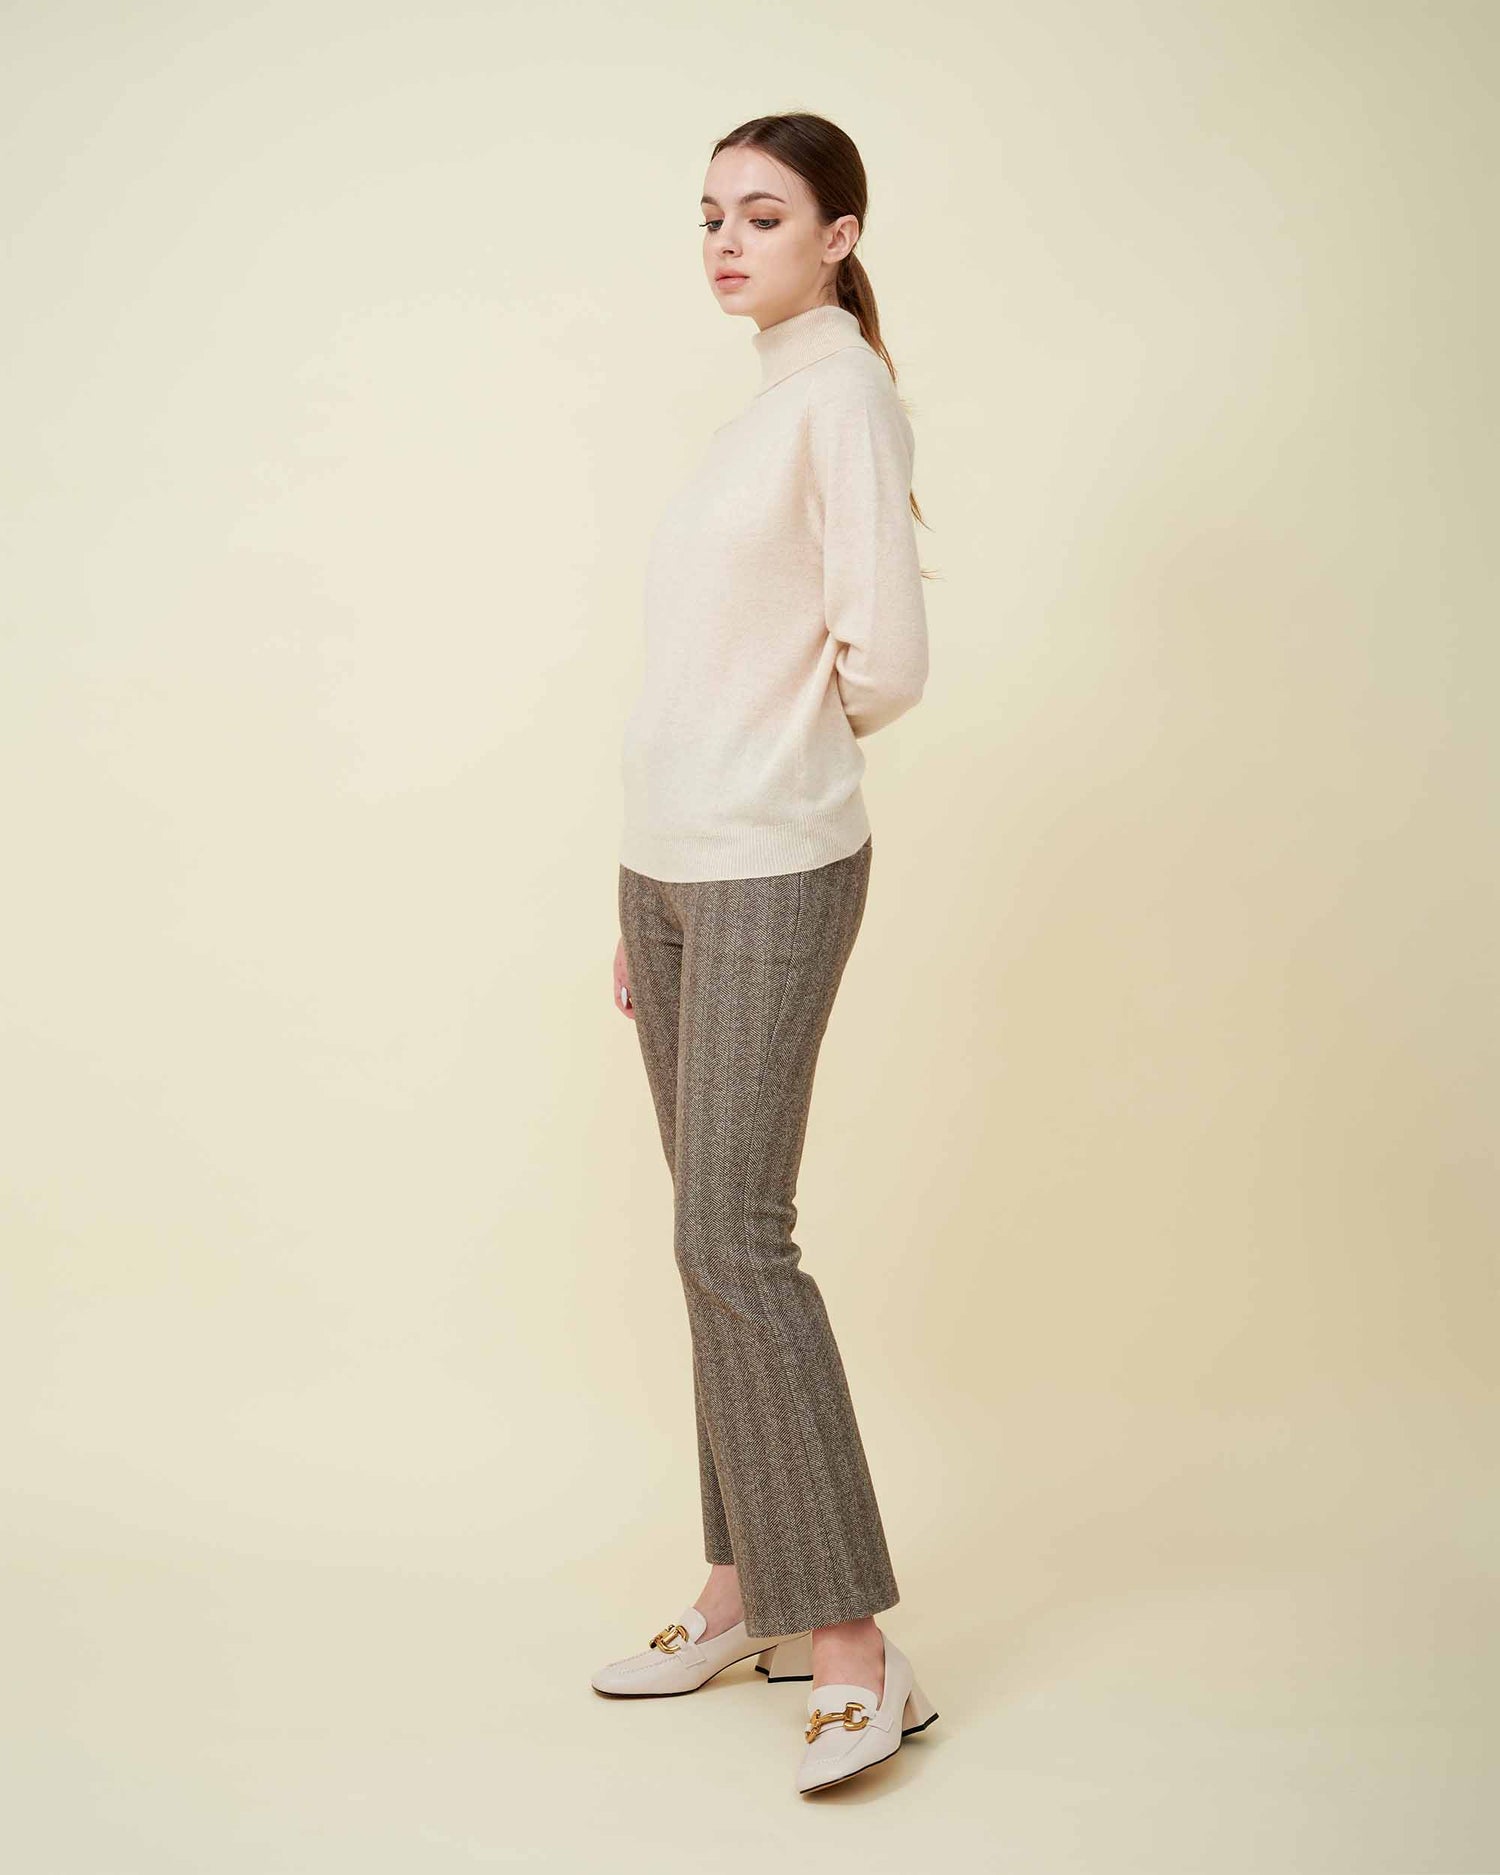 A side view finely knitted turtleneck sweater, Cashmere sweater , DAVINII , soft and comfy